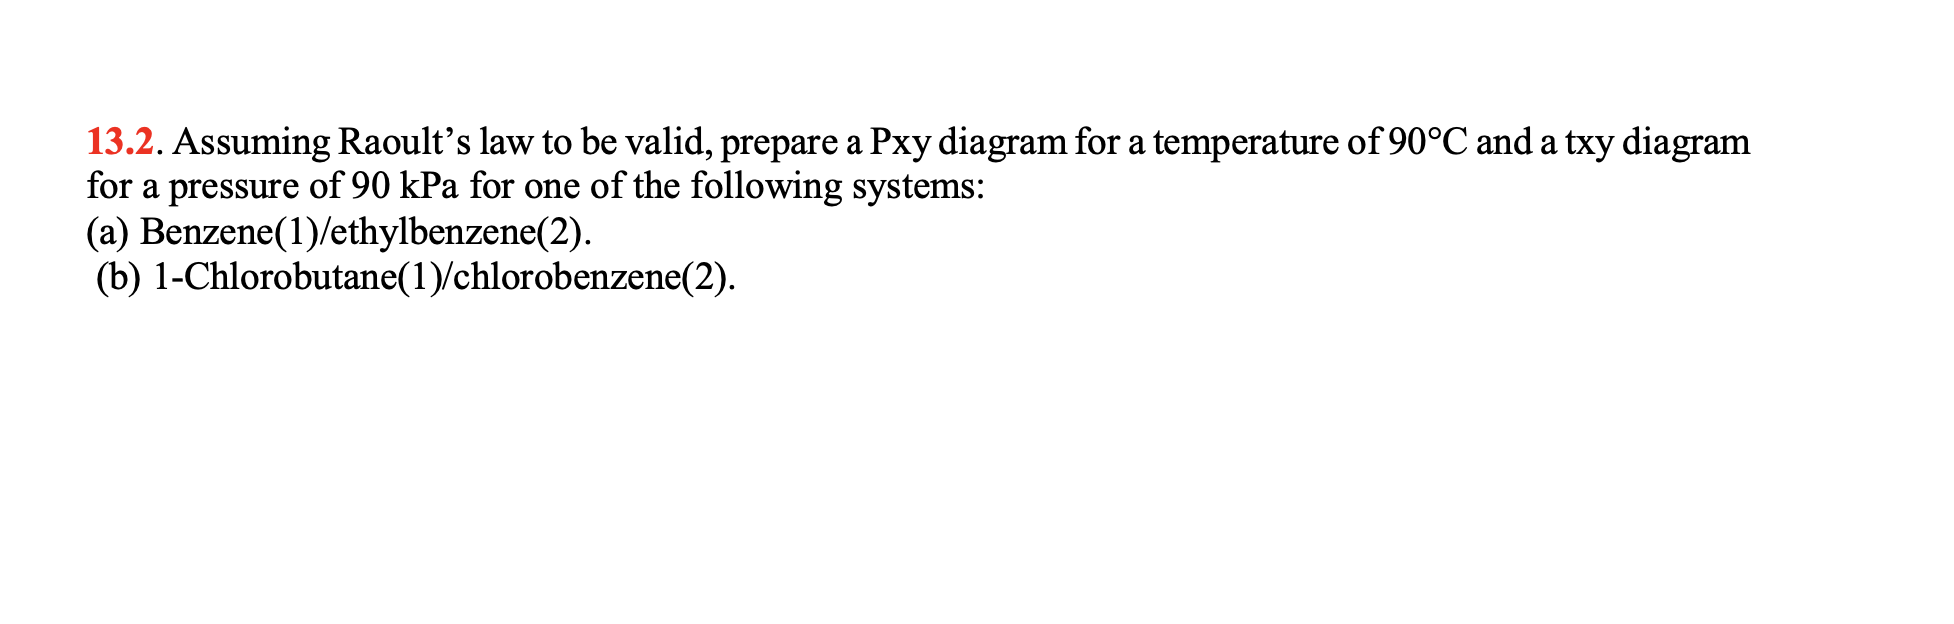 13.2. Assuming Raoults law to be valid, prepare a Pxy diagram for a temperature of 90°C and a txy diagram for a pressure of